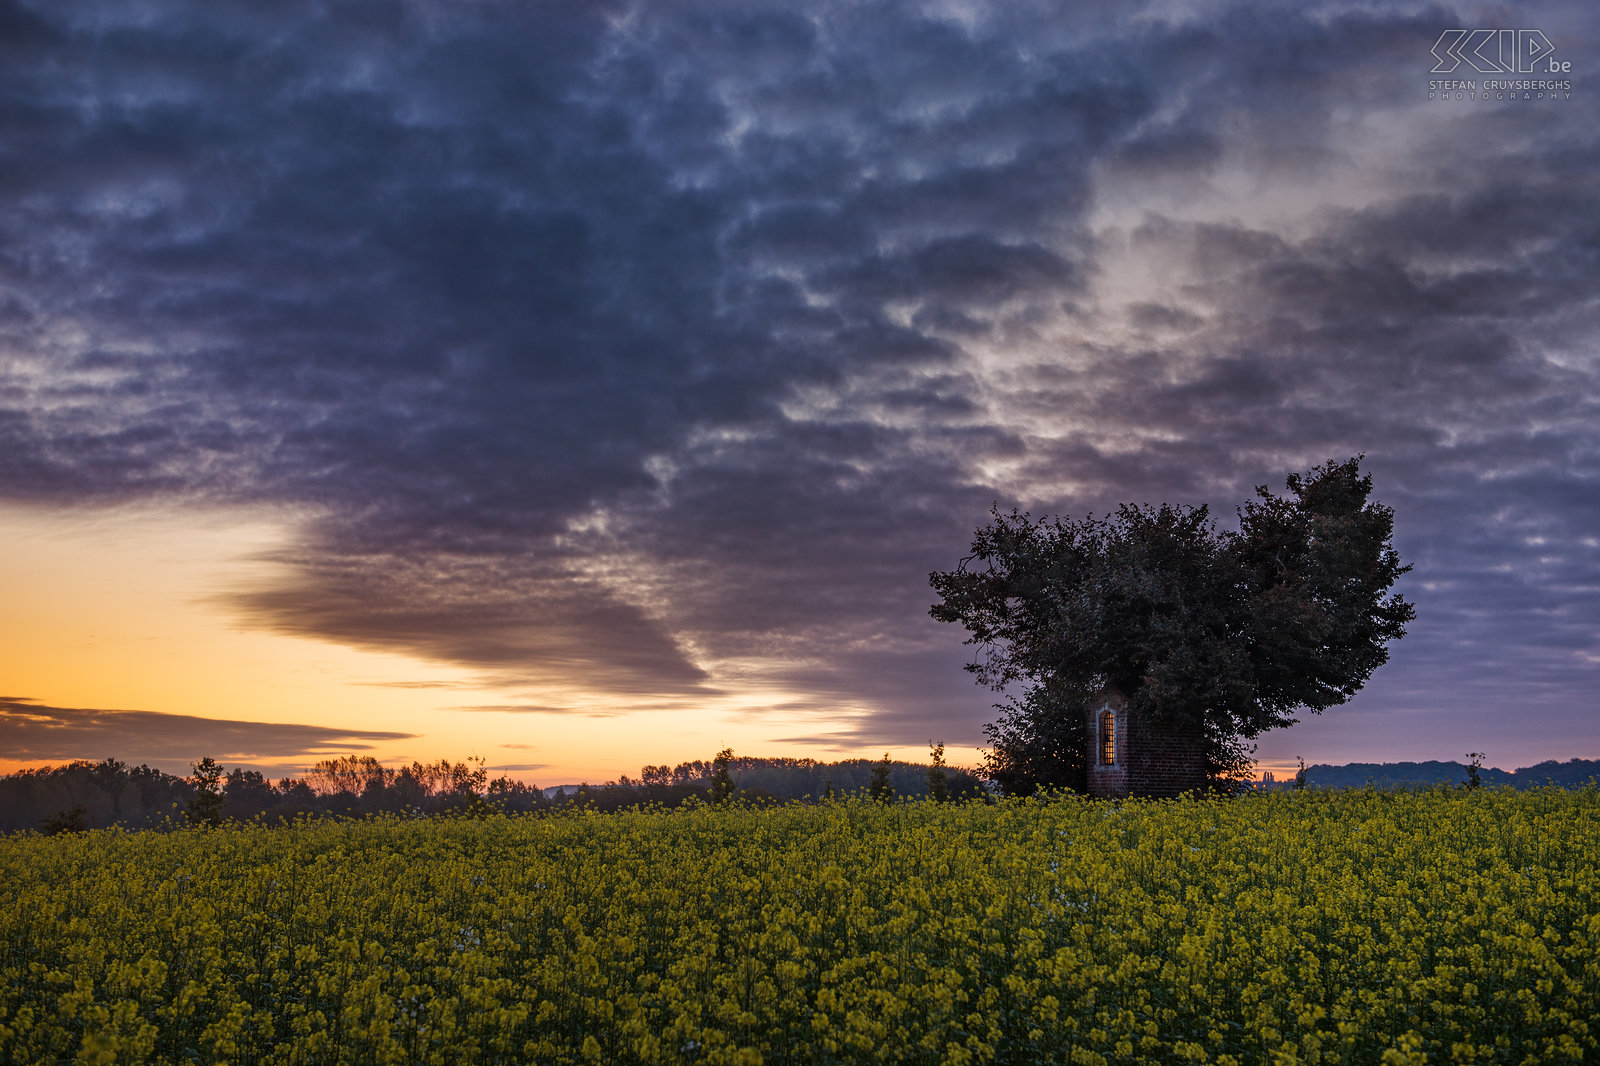 Sint-Pieters-Rode - Sunrise at Saint Joseph chapel Sunrise in a field with blooming rapeseed at the Saint Joseph chapel. The old lime tree was damaged during a storm in 2014. The chapel is located nearby the castle of Horst in the village of Sint-Pieters-Rode (Holsbeek) in the province Flemish Brabant (Belgium). Stefan Cruysberghs